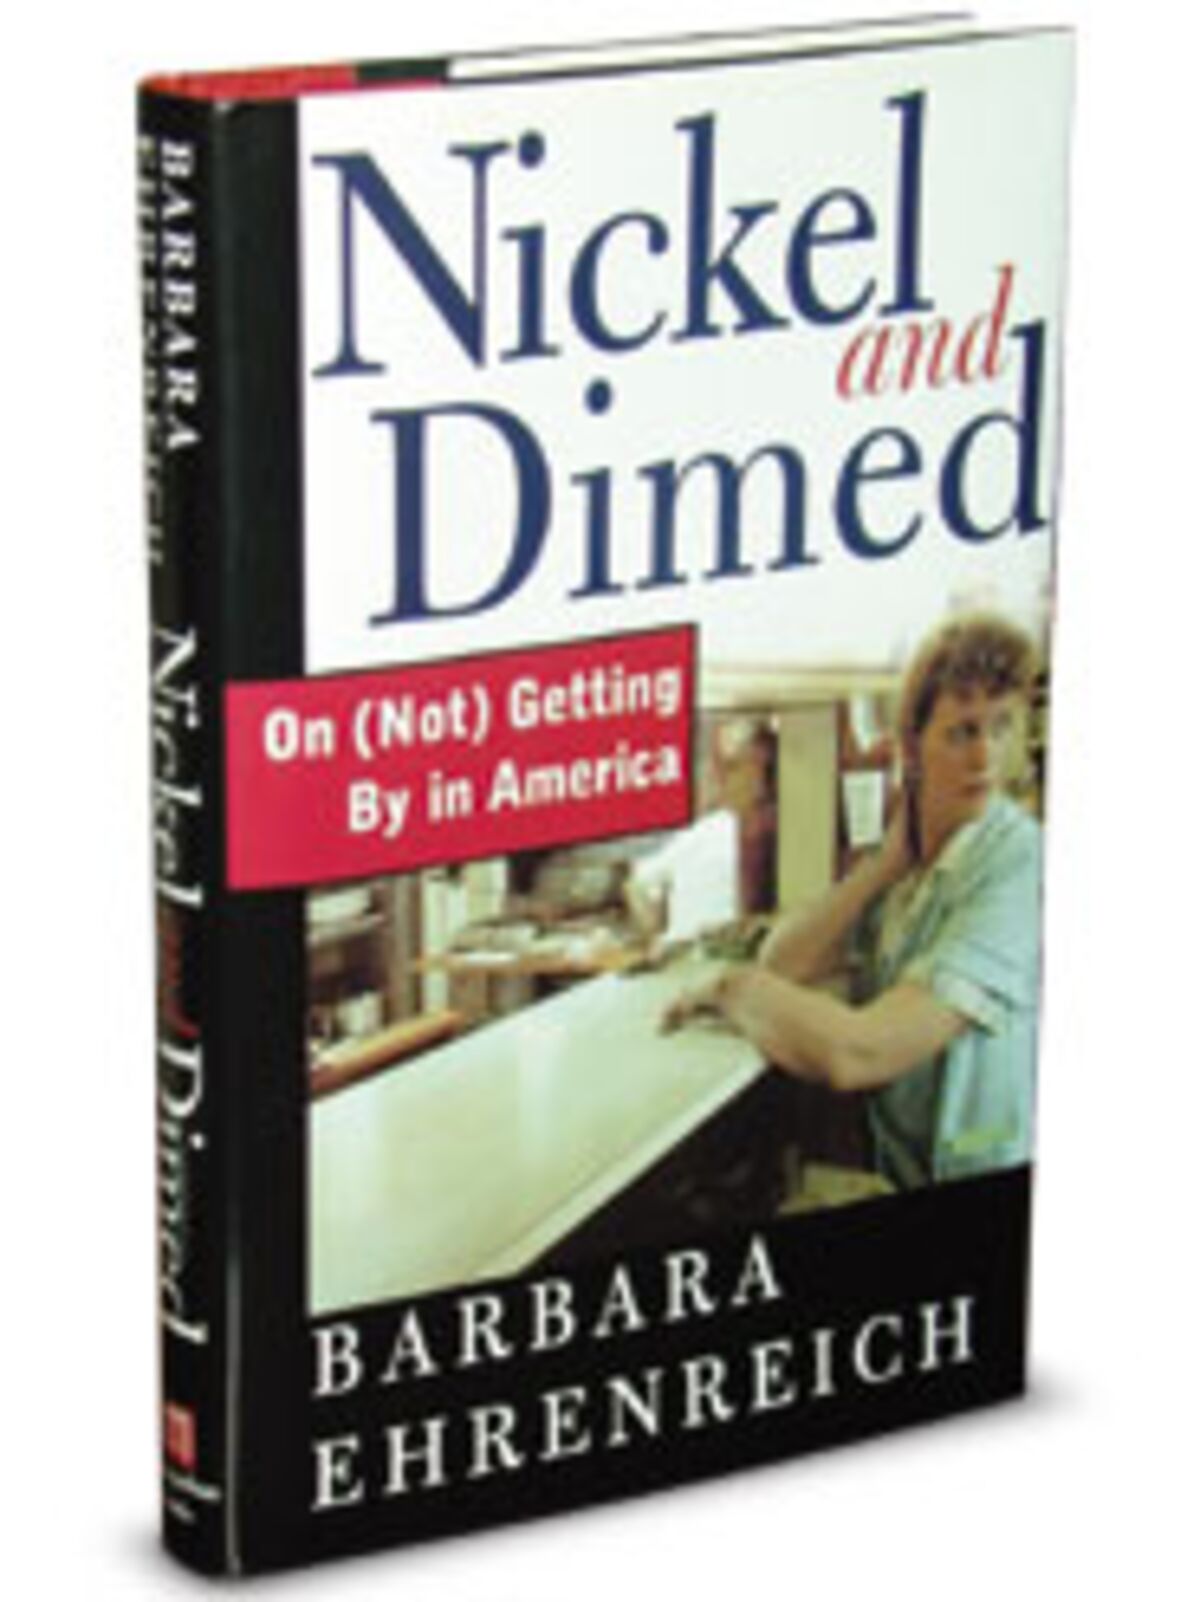 nickel and dimed article